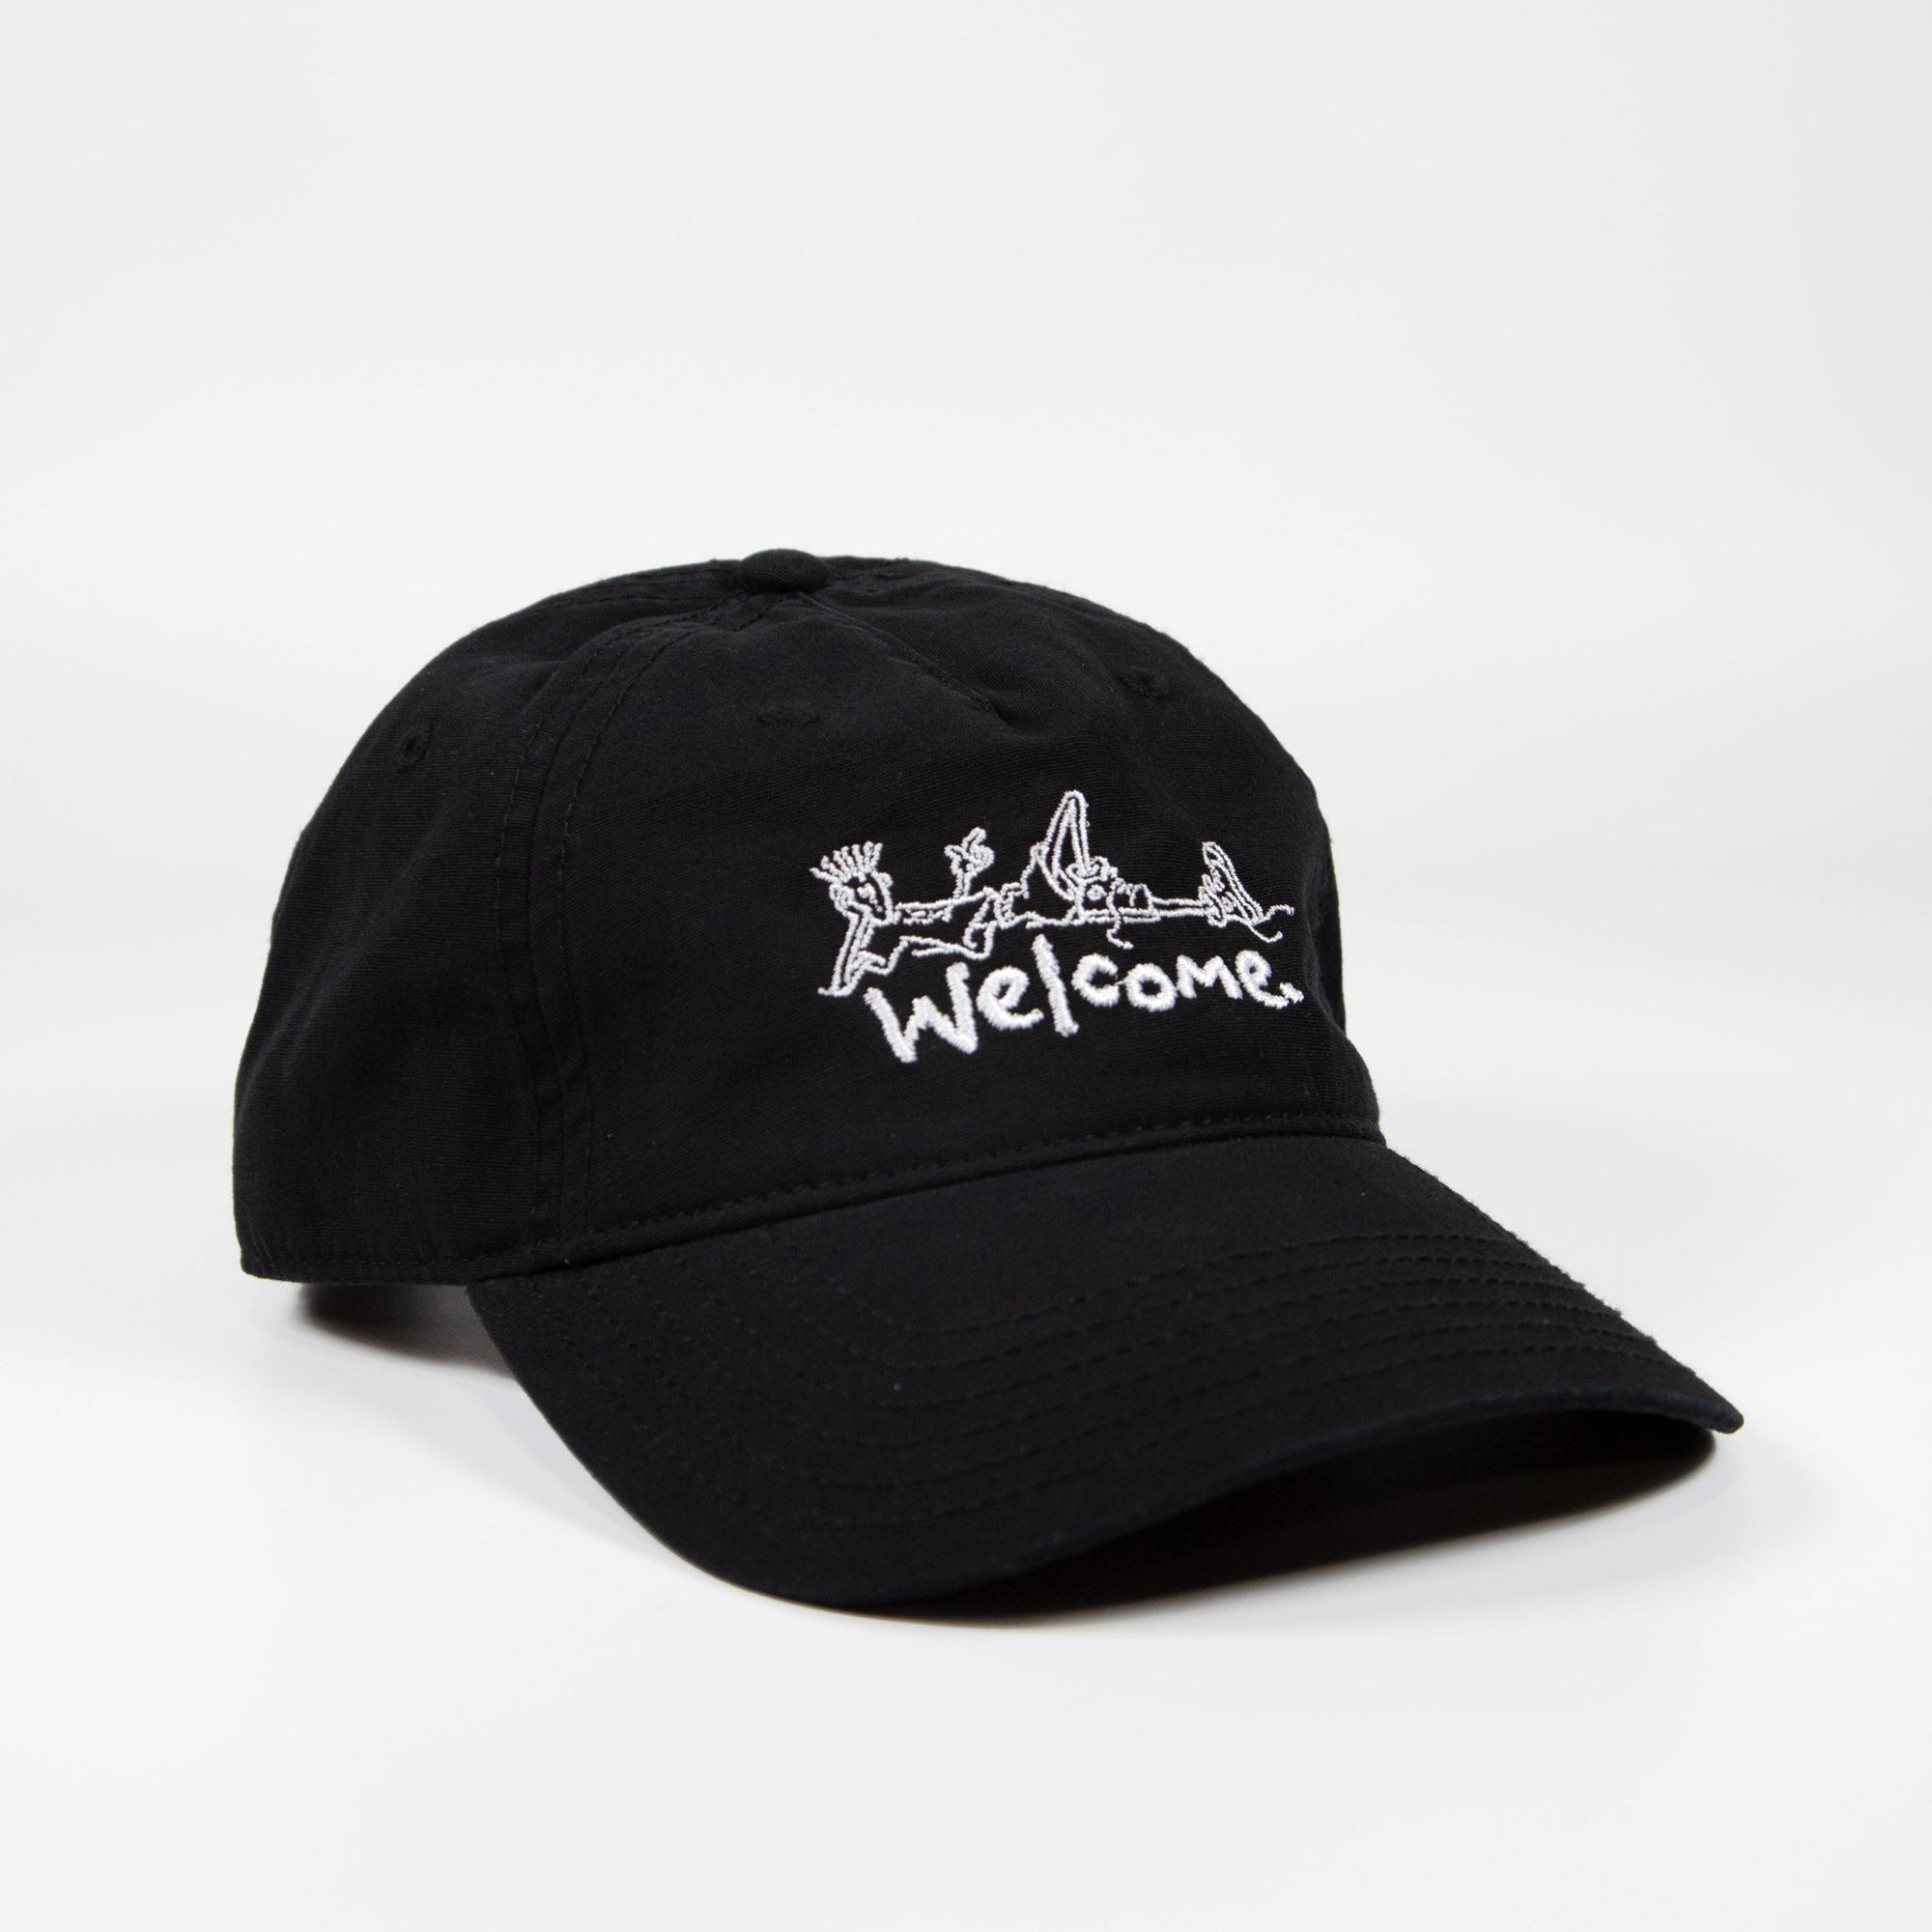 Welcome Skate Store Relax Black Cap